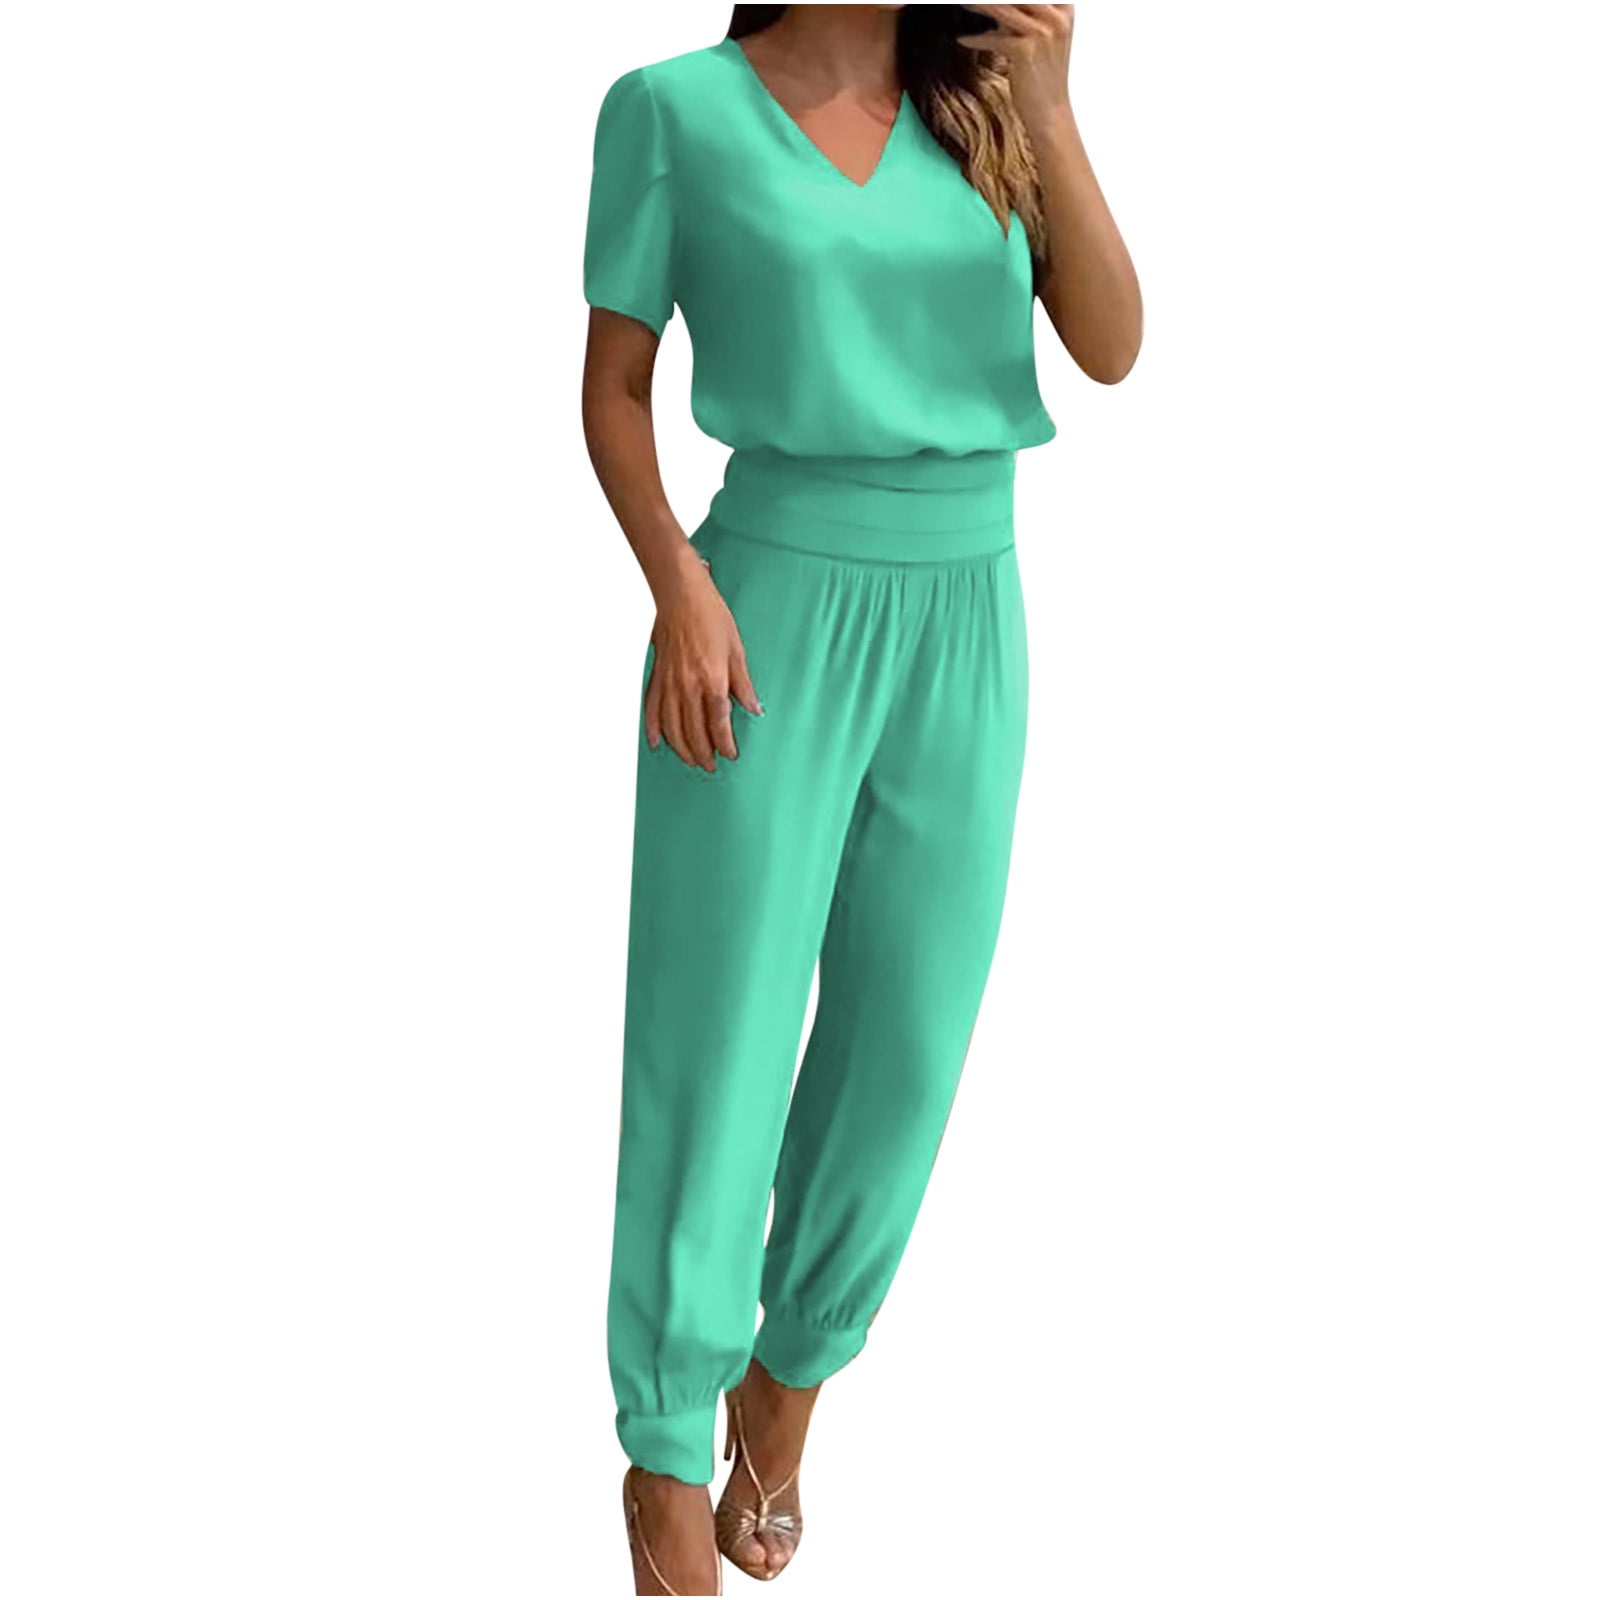 REORIAFEE Women Sets Outfits Summer 80s Outfit Fashion Women Round Neck  Short Sleeve Blouse + Loose Pockets Pants Sets Green XL